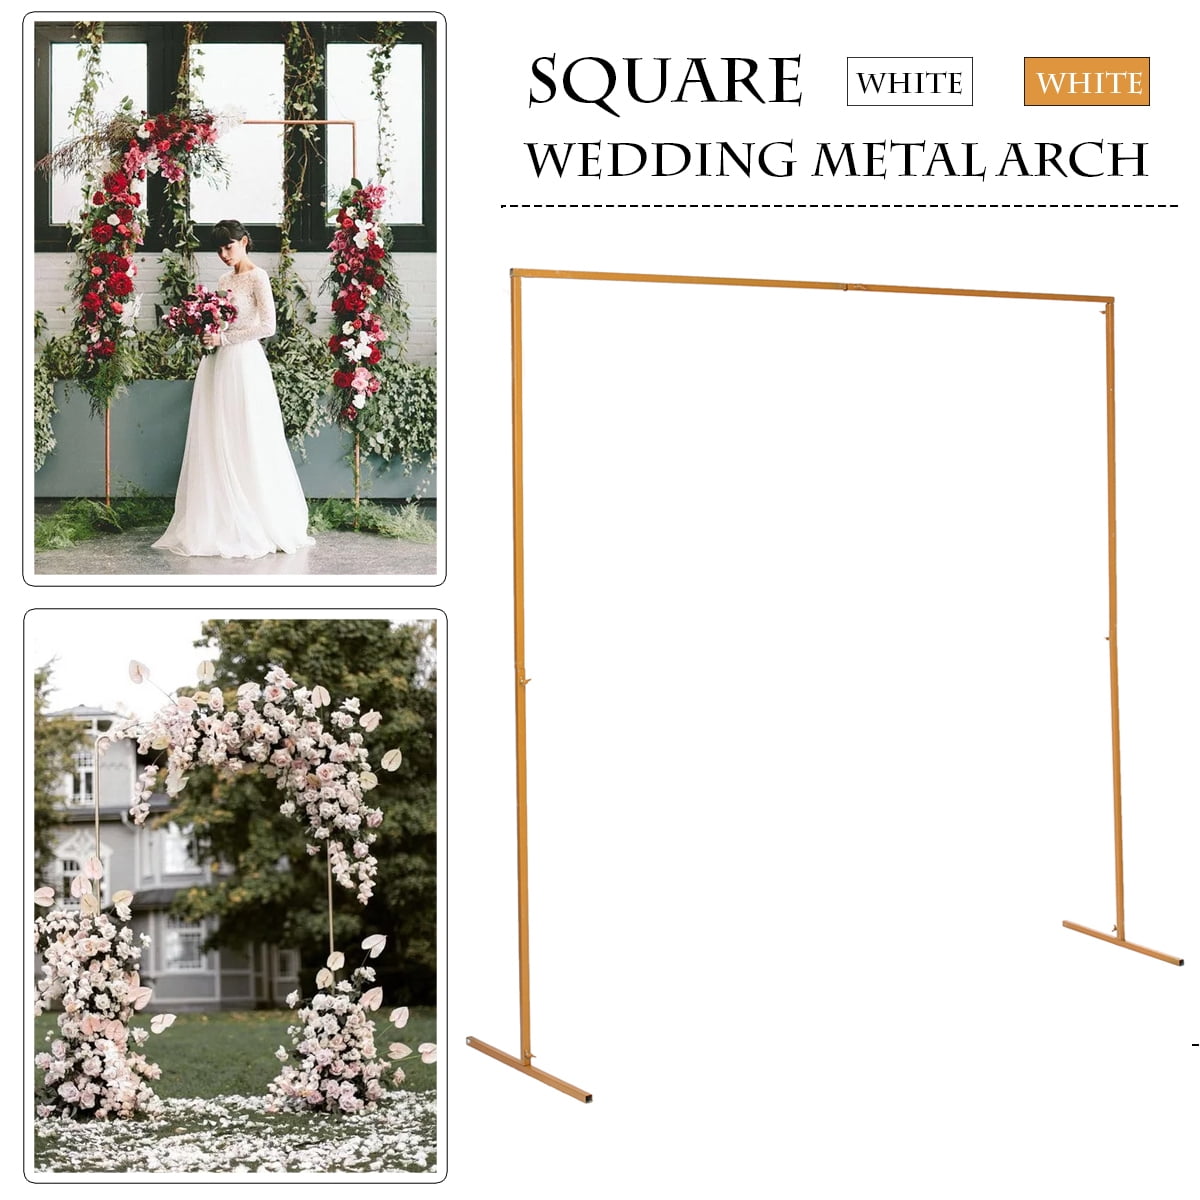 Wedding Arch Stand Gold 6.56 x 6.56 Feet Square Metal Arch for Wedding Decorations Birthday Party Bridal Prom Garden Event Decoration Party Supplies 